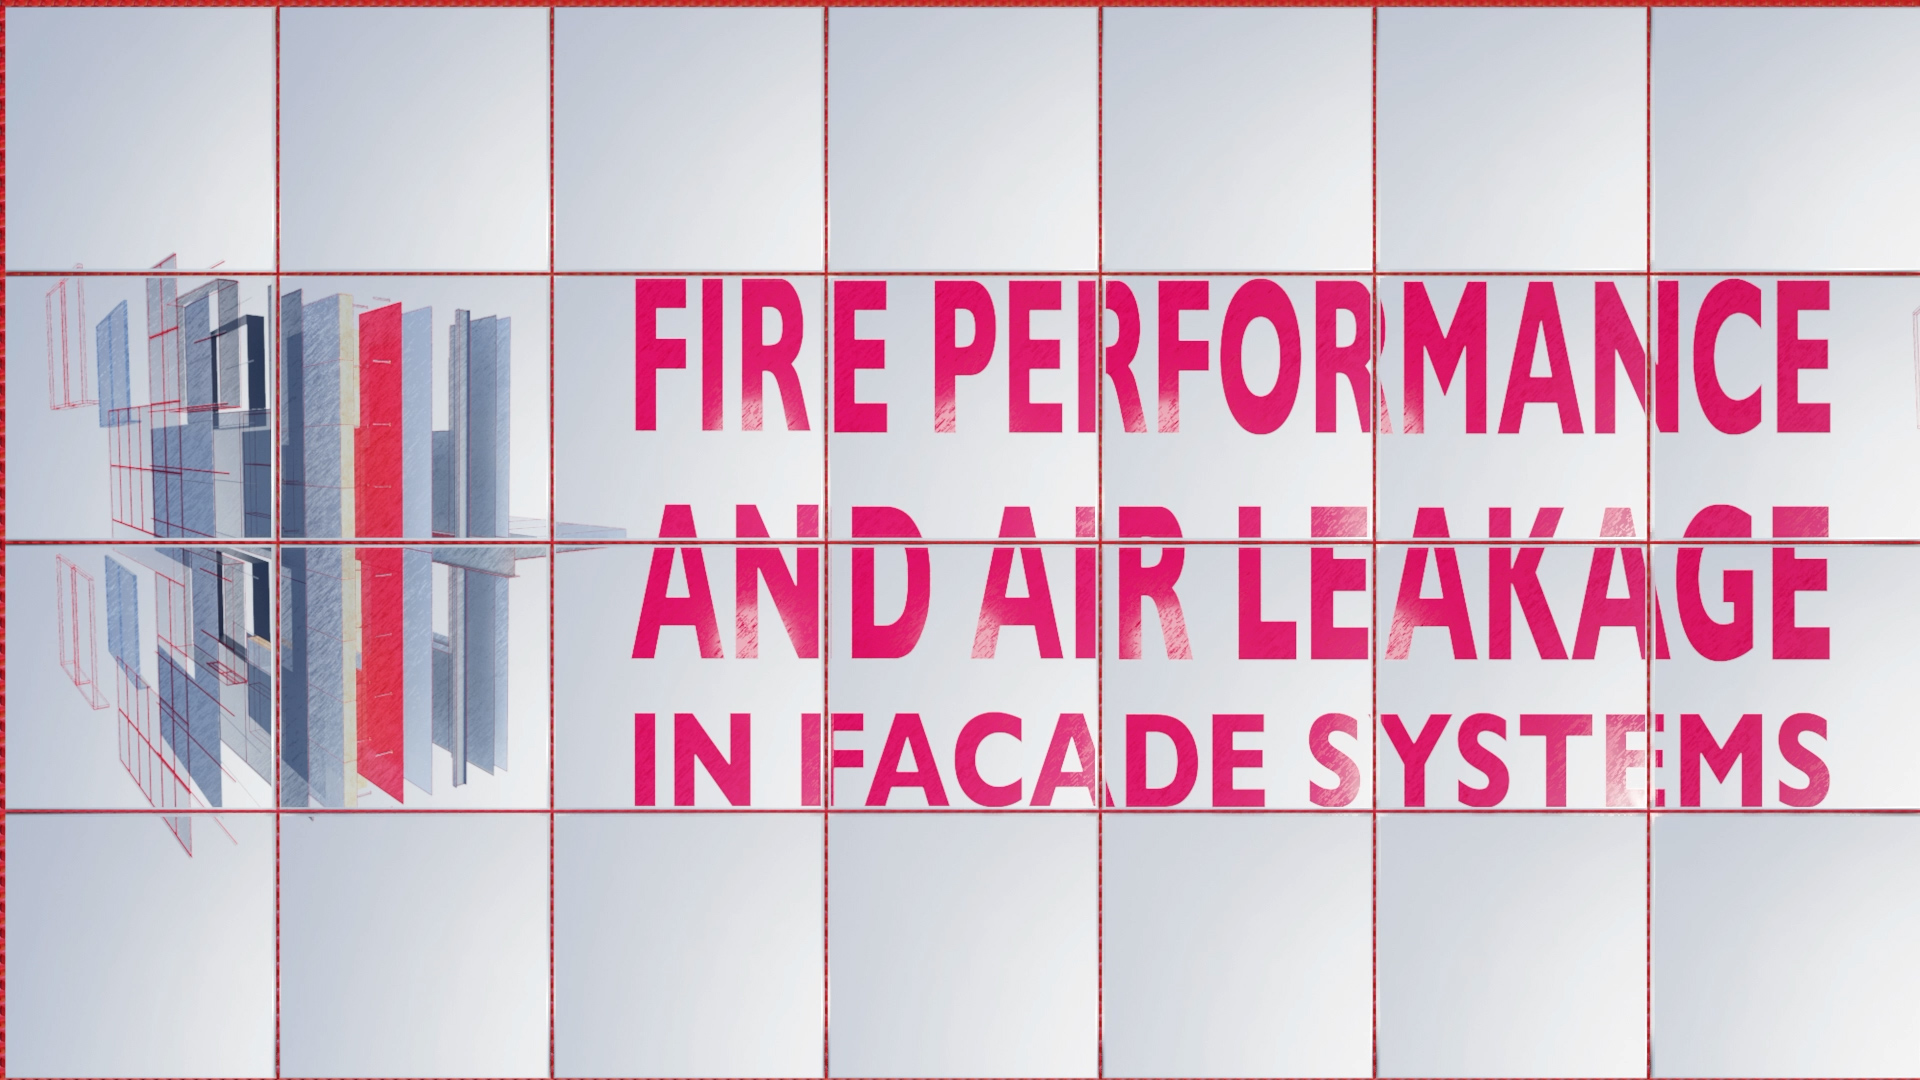 Fire Performance & Air Leakage in Facade Systems